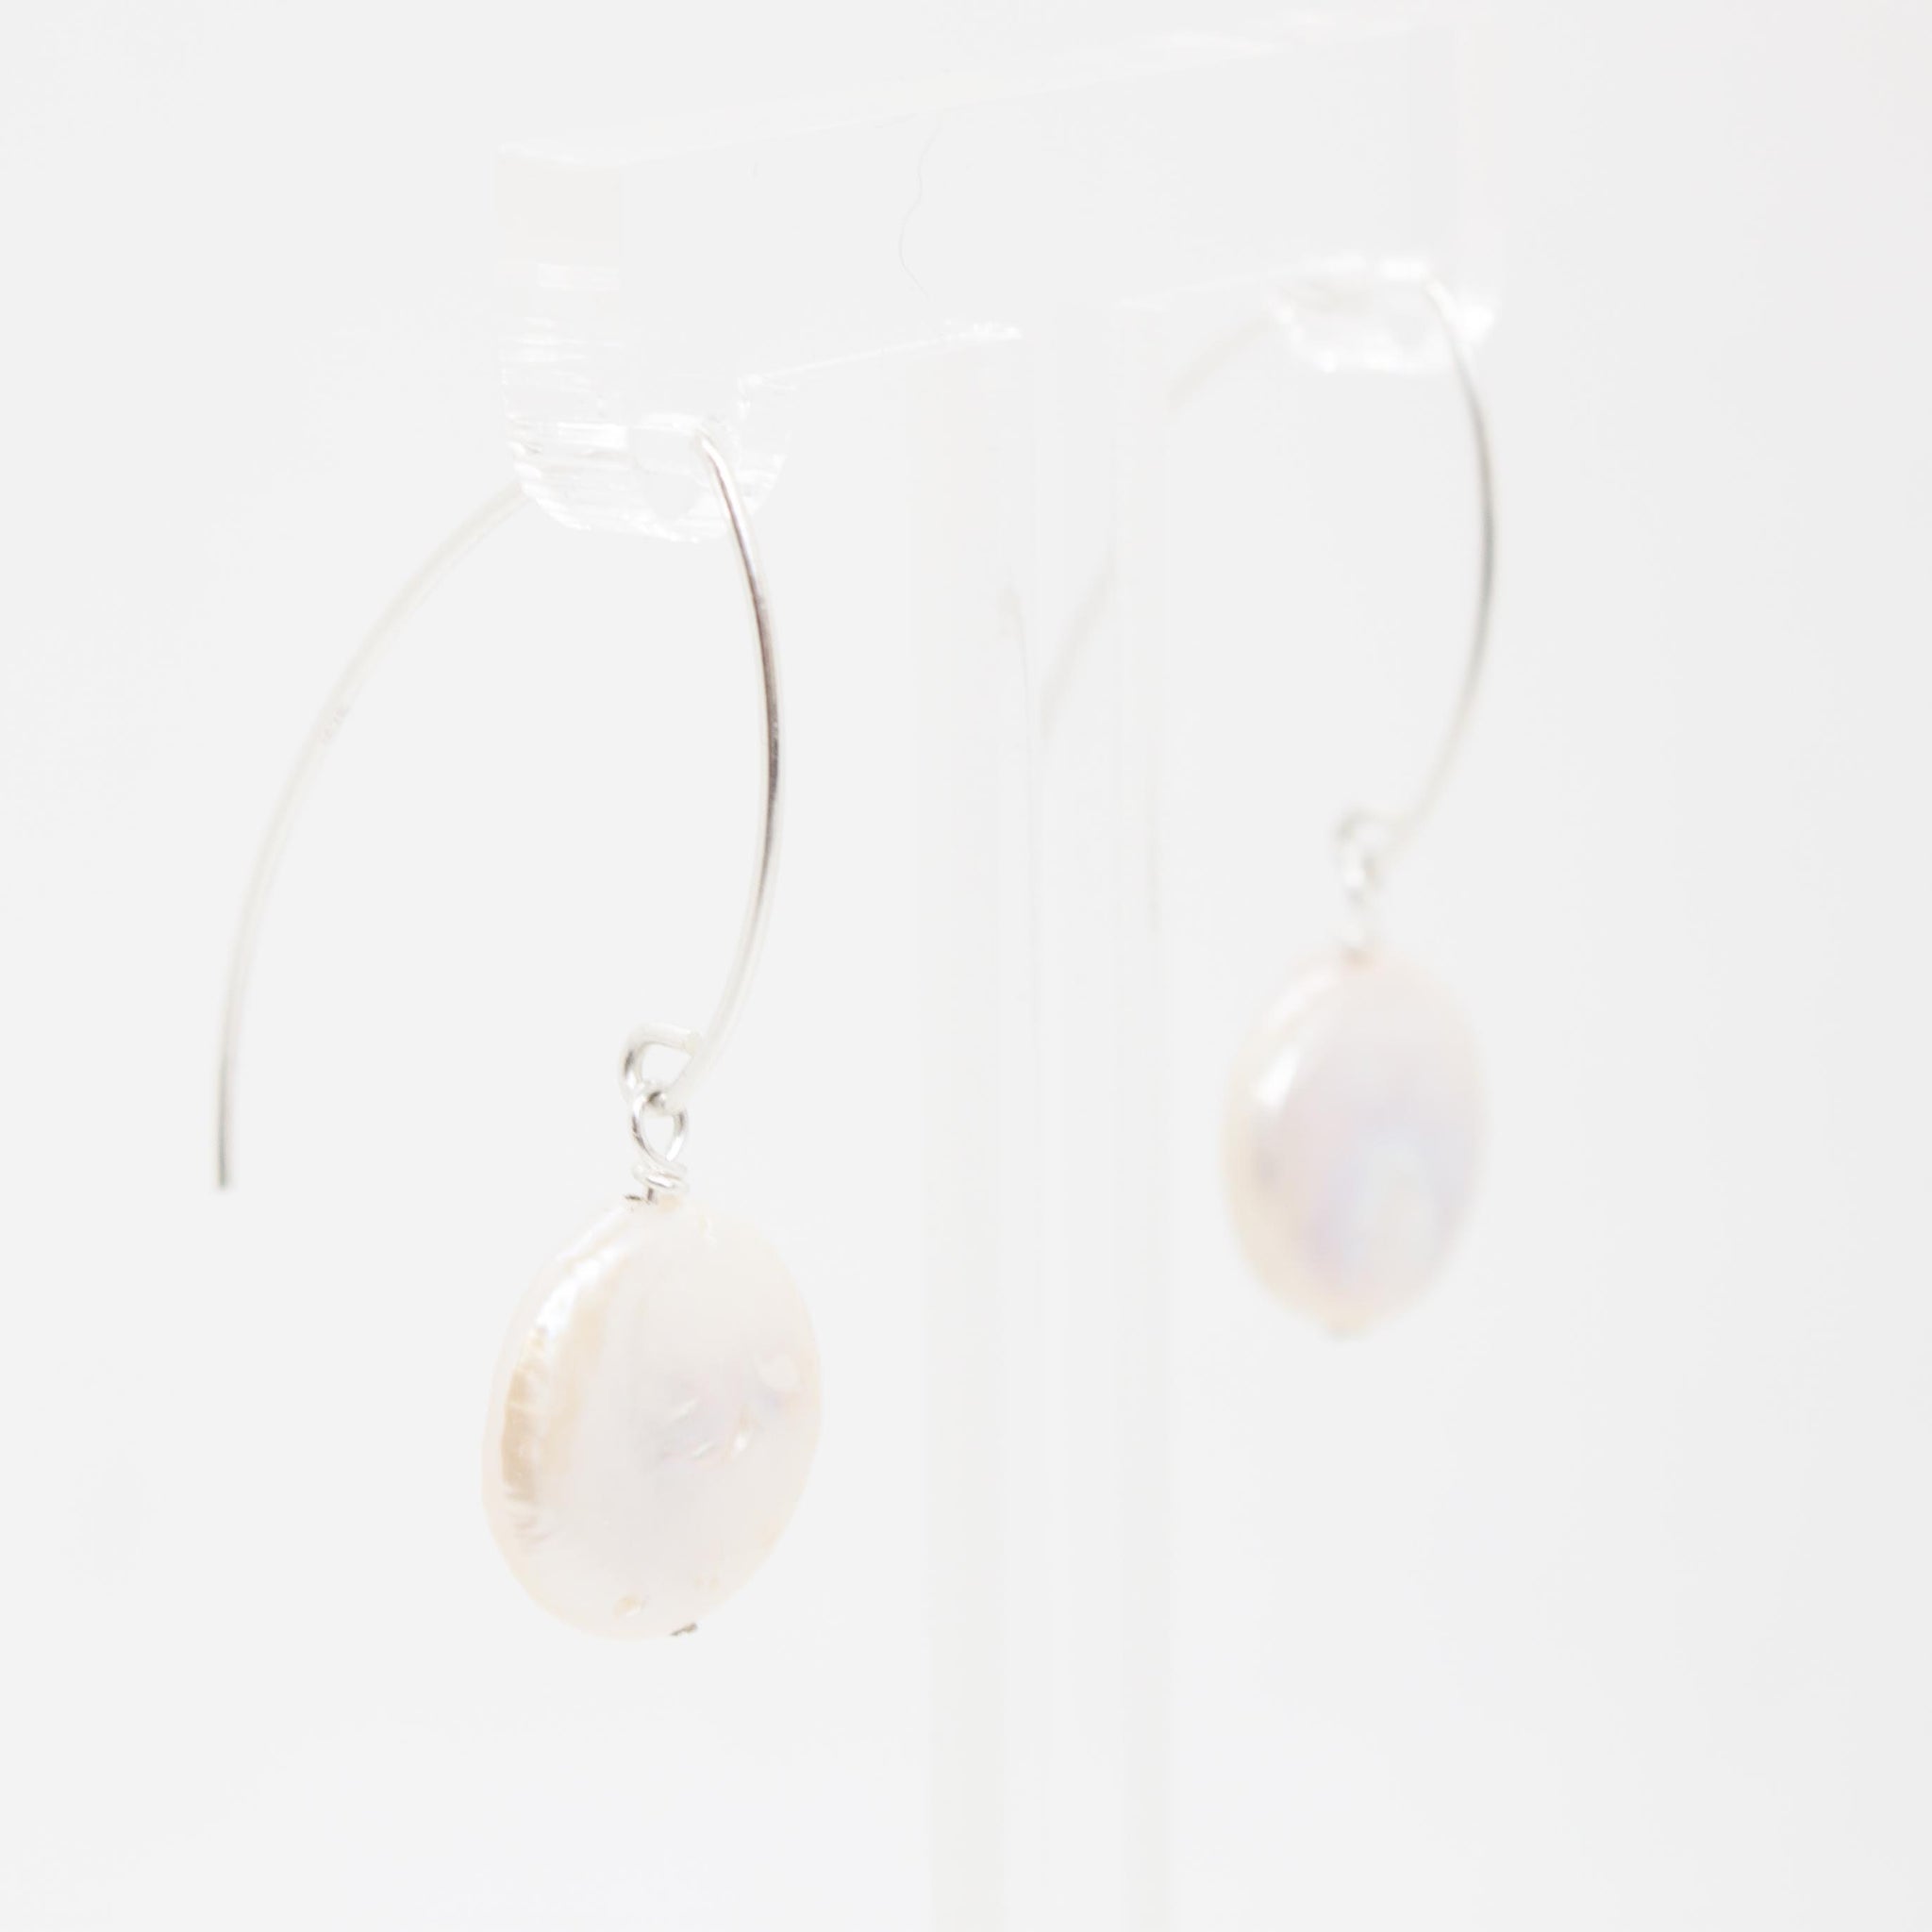 These versatile pearl earrings - along with their gold counterparts - are kp jewelry co.'s bestsellers! 1.5 inch keshi pearl earrings on sterling silver earring hooks (hypo-allergenic and sensitive-ear friendly). Handmade in Toronto by kp jewelry co.